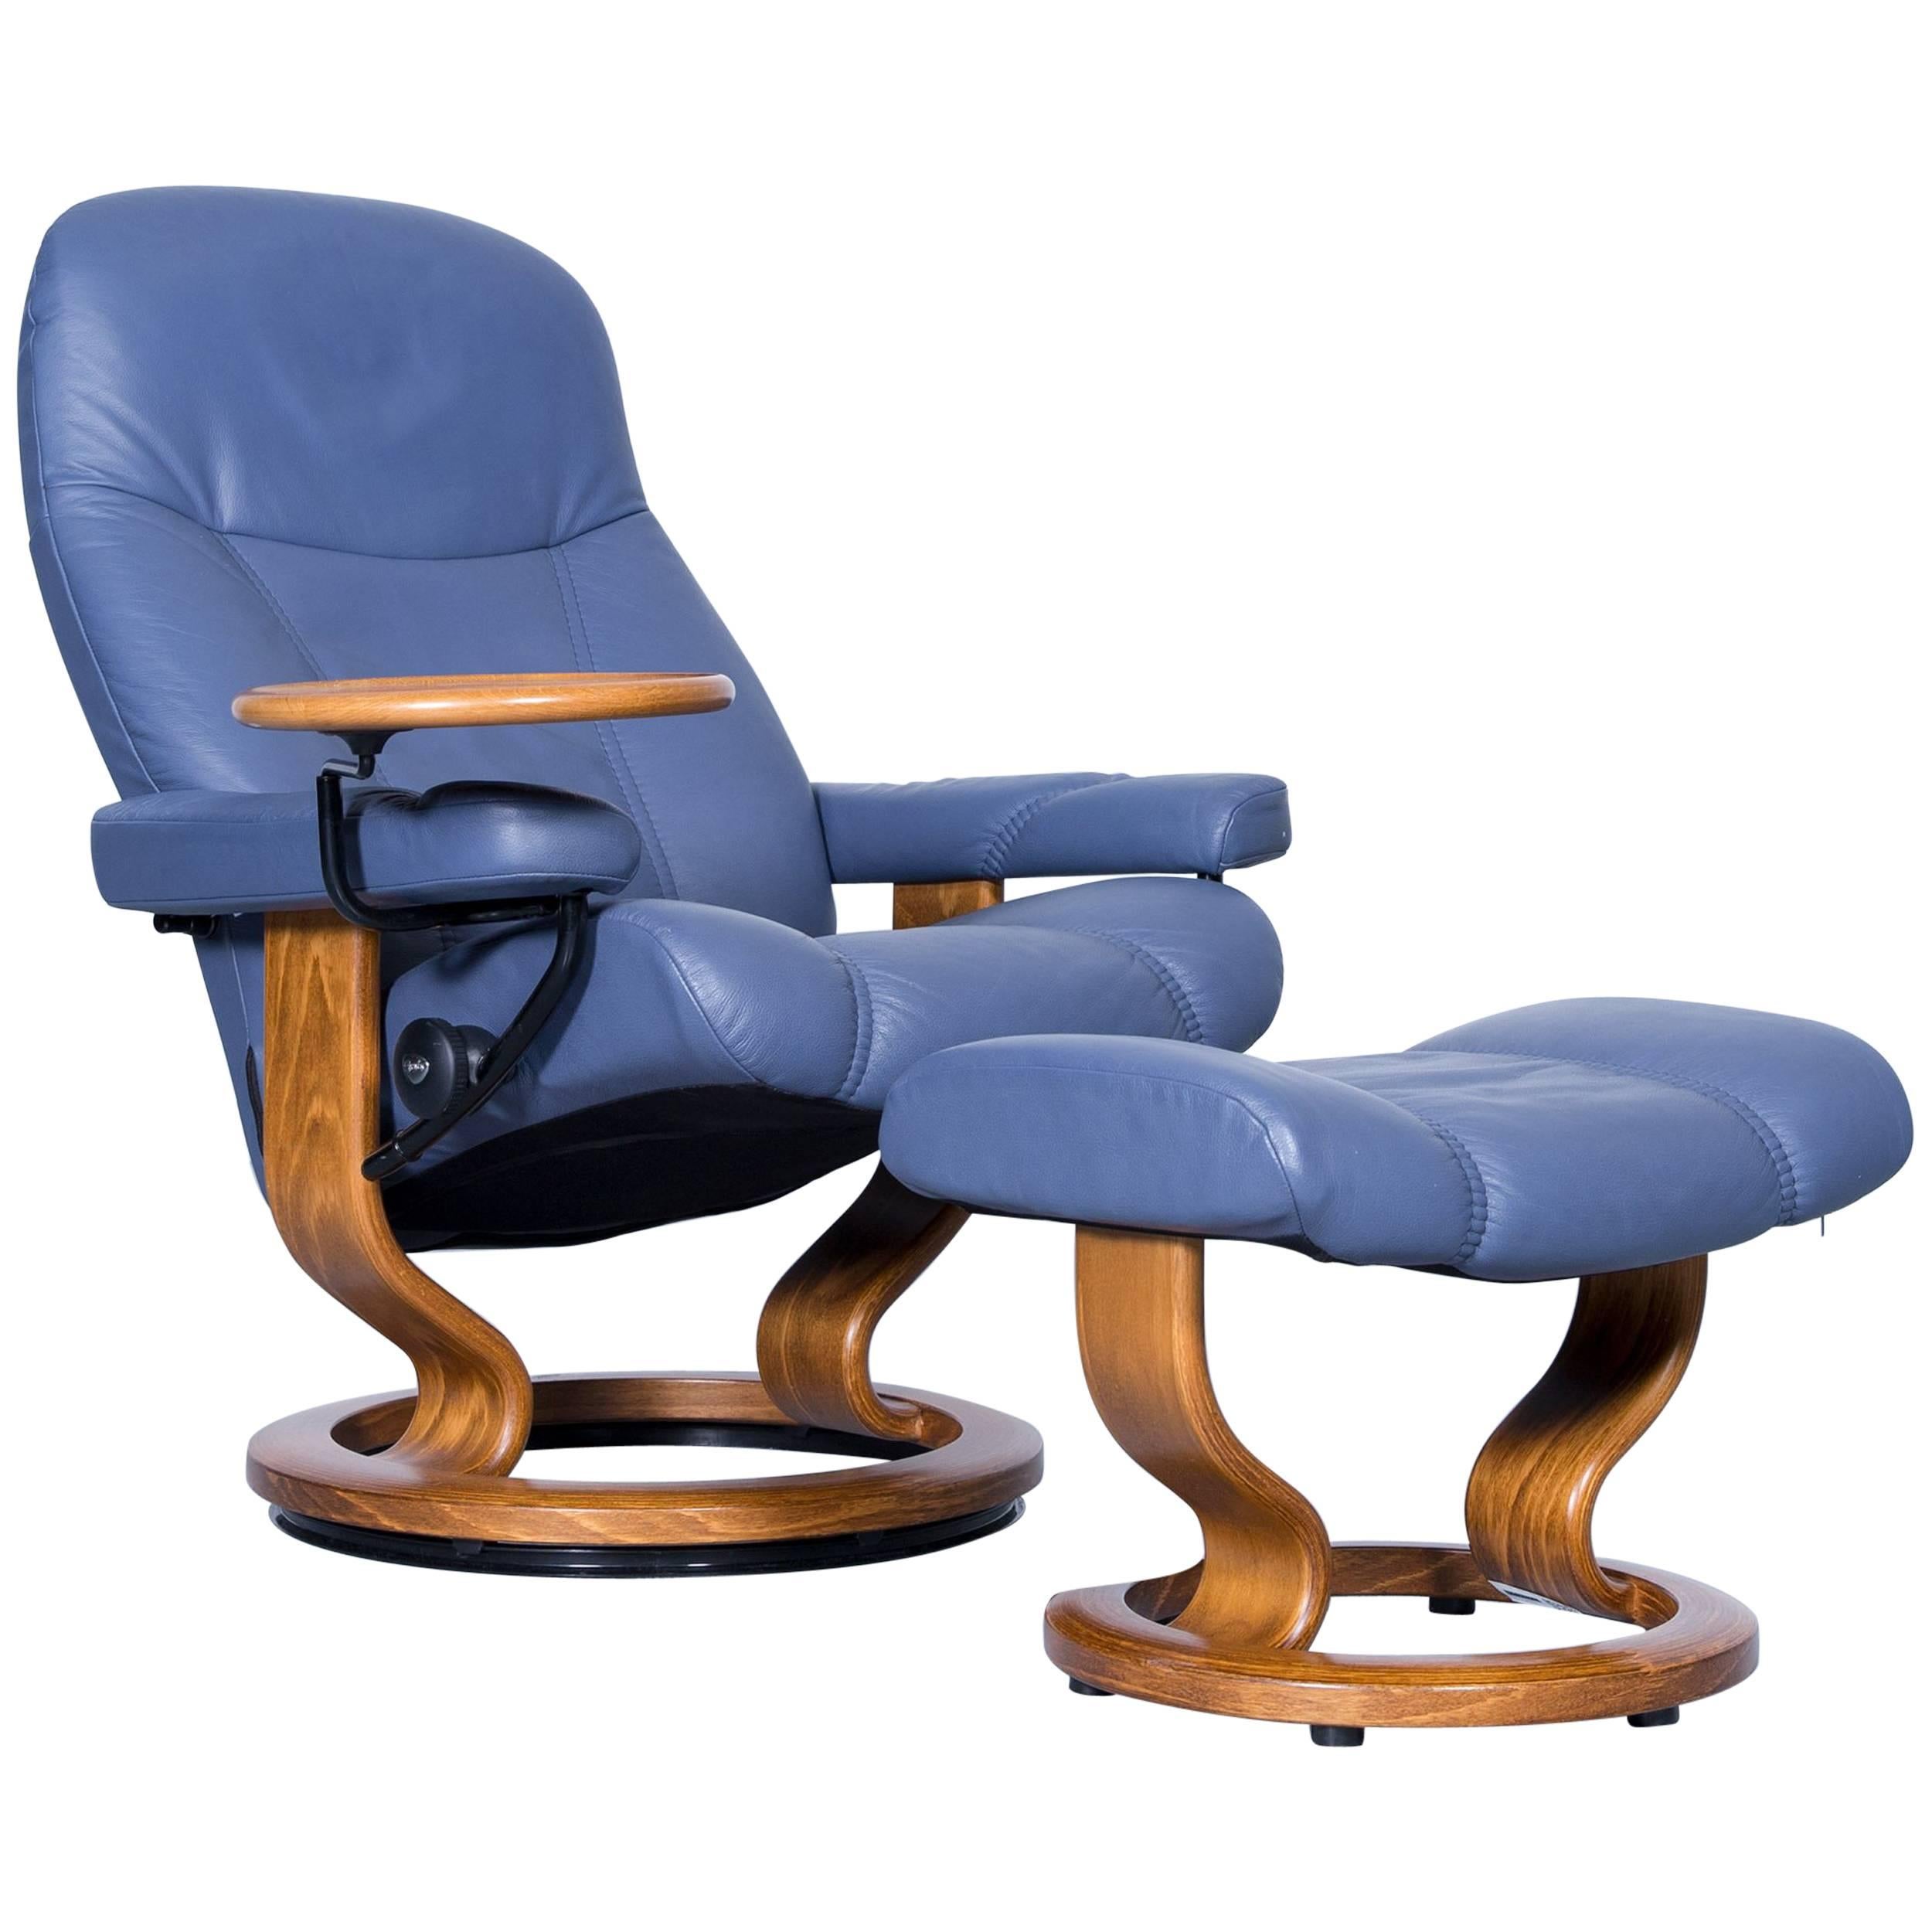 Stressless Consul Relax Armchair and Footstool Set Blue Leather Relax Function